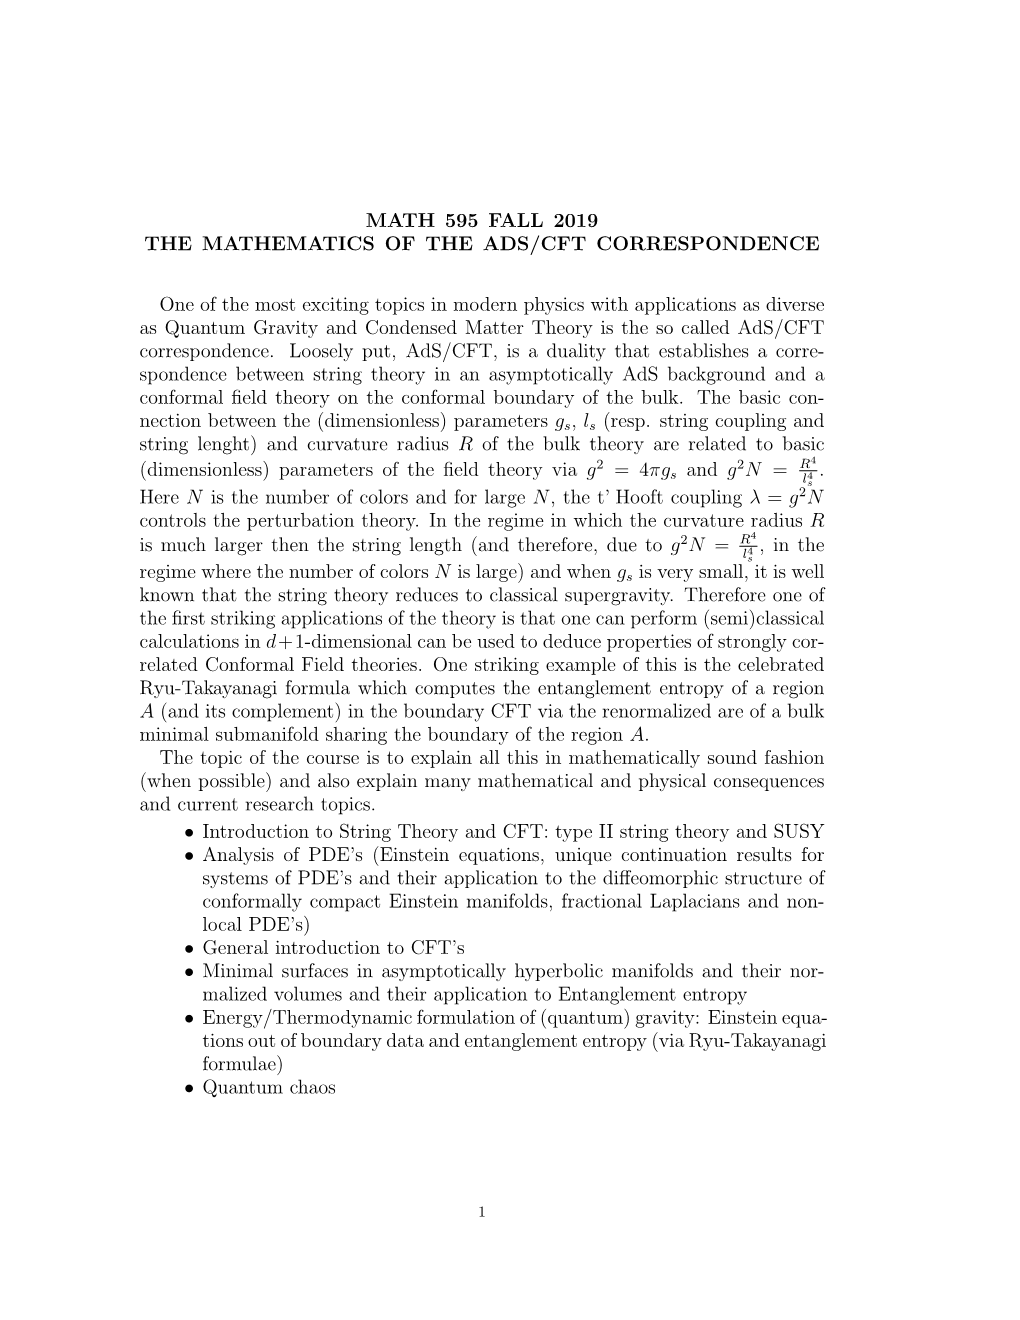 MATH 595 FALL 2019 the MATHEMATICS of the ADS/CFT CORRESPONDENCE One of the Most Exciting Topics in Modern Physics with Applicat